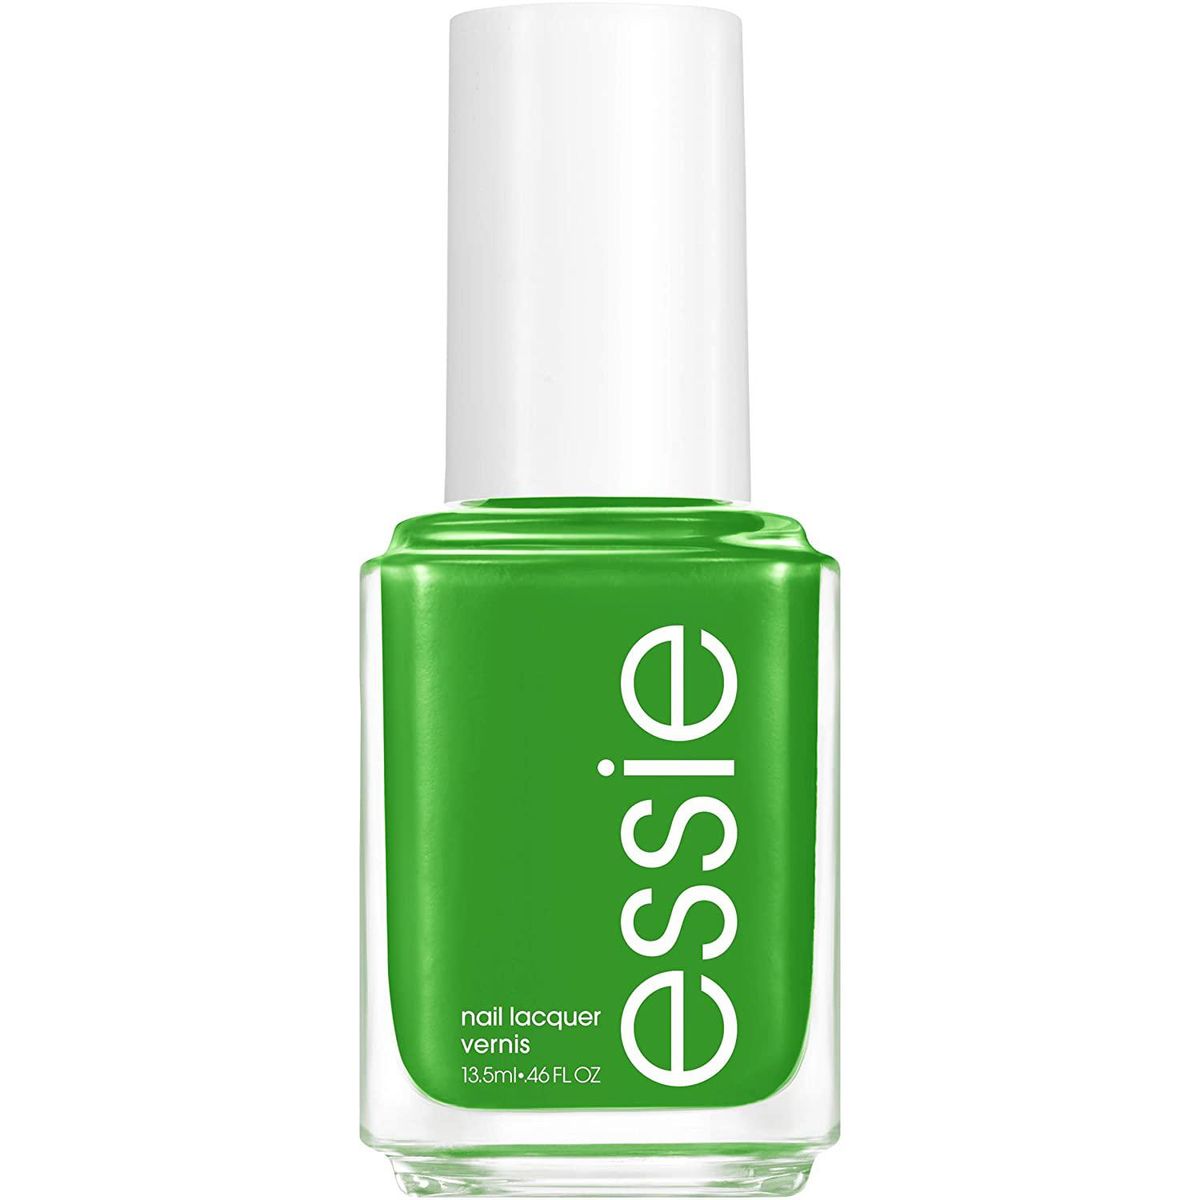 Limited Edition Summer 2021 Nail Polish in Feeling Just Lime